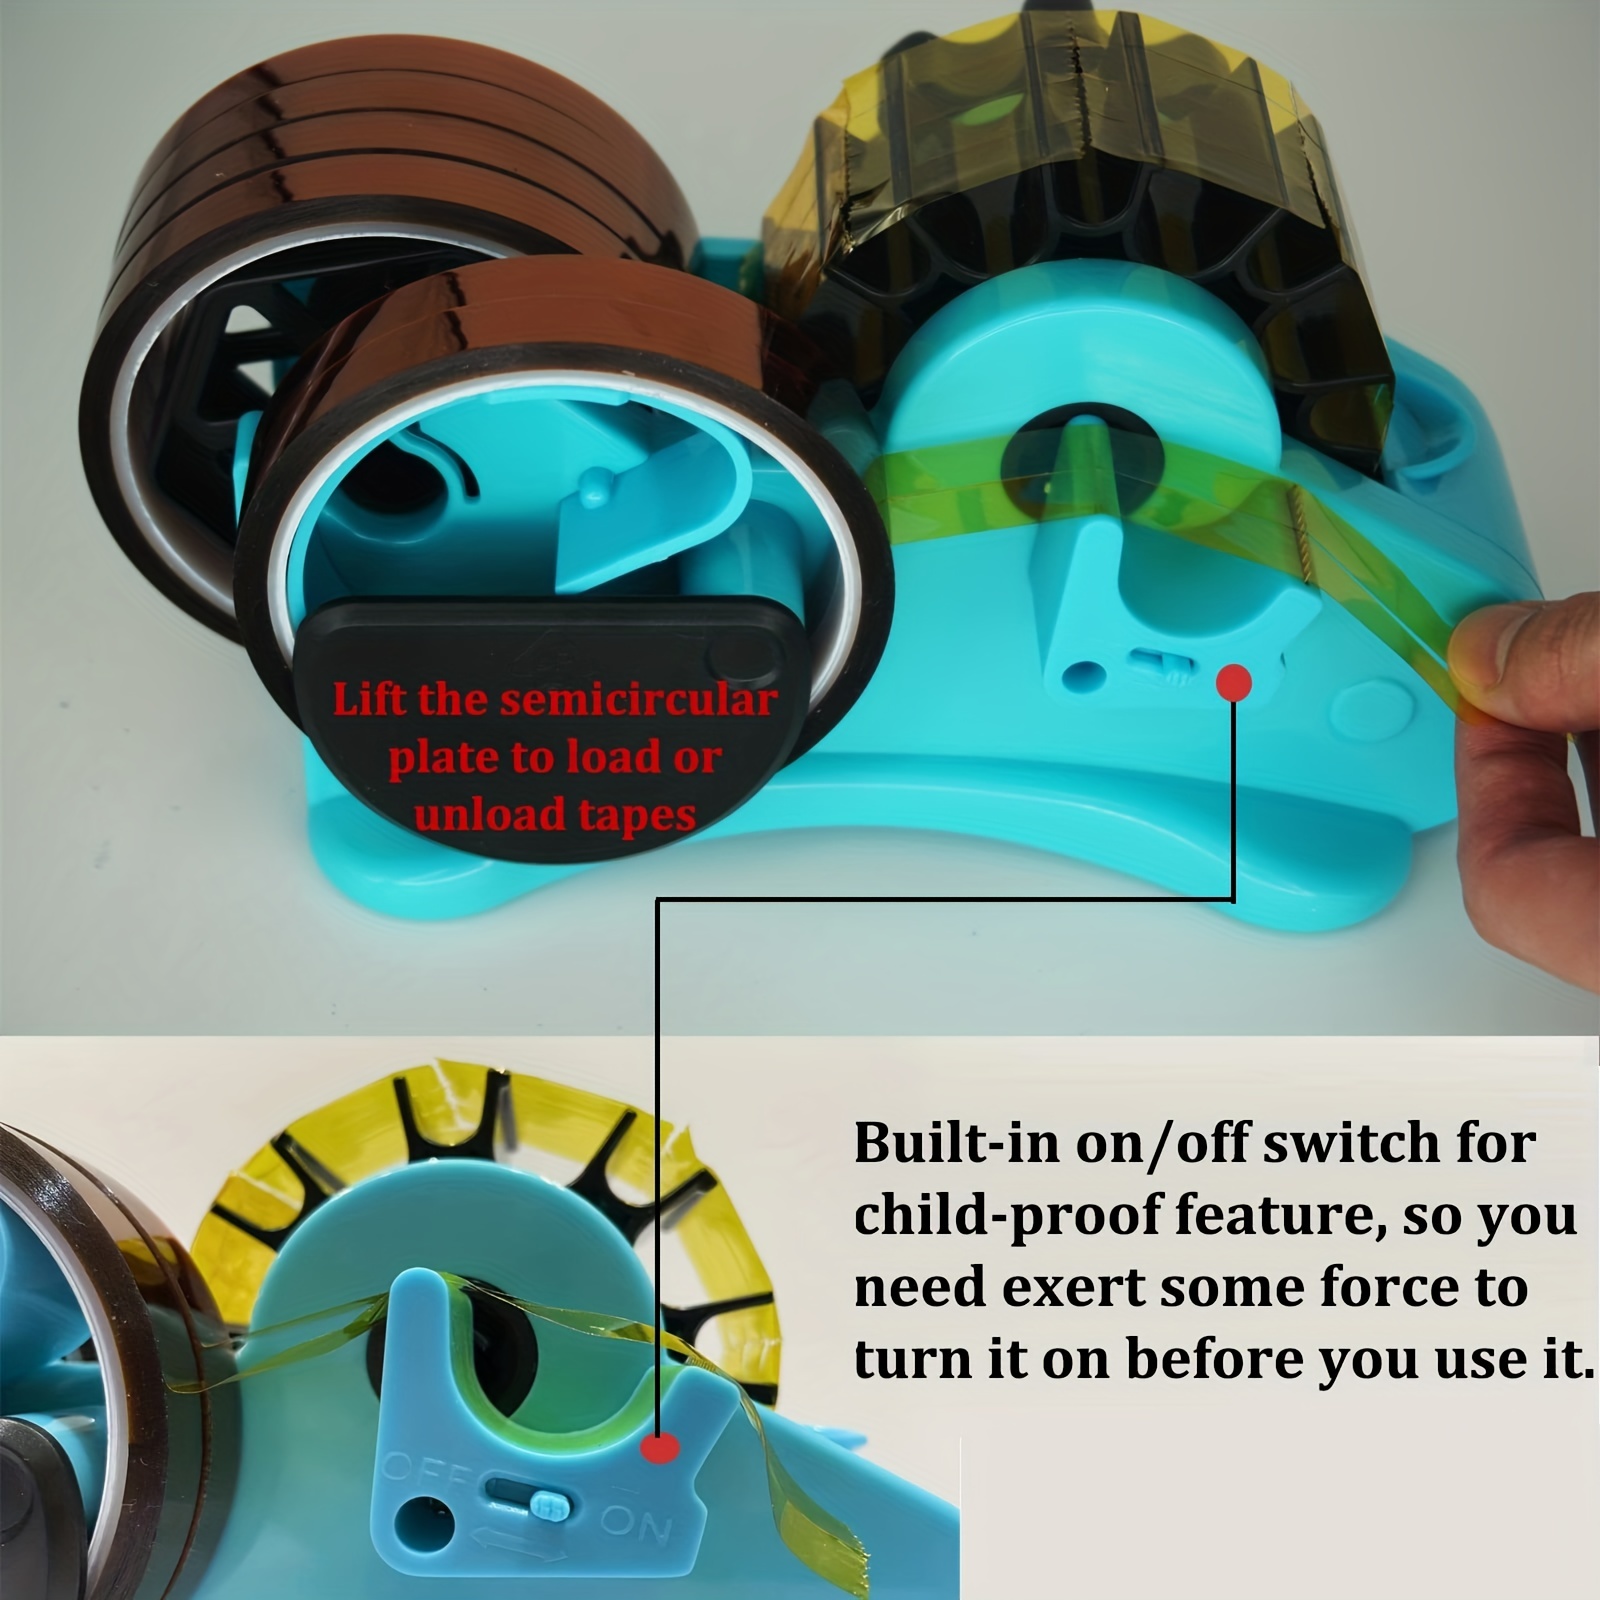 Multiple Roll Cut Heat Tape Dispenser Sublimation for Heat Transfer Tape,Tape Dispenser with 1 inch and 3 inch Core Blue, Size: 35